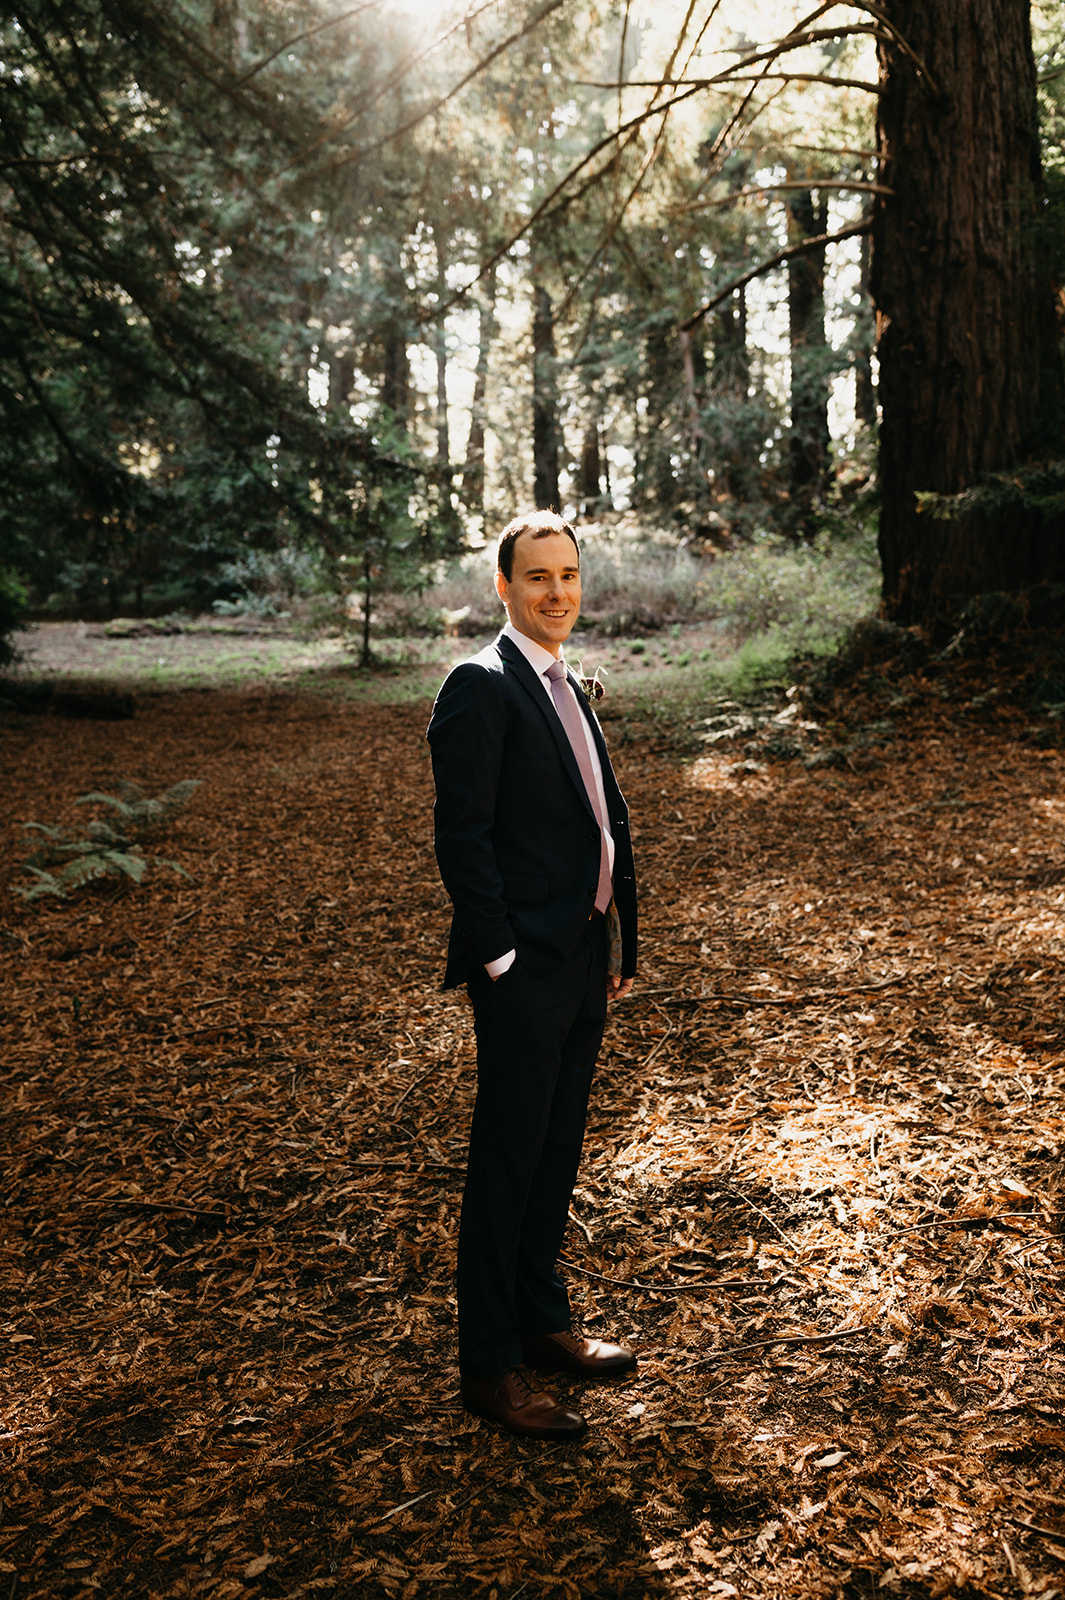 The groom waits for the bride at the ceremony spot in the forest in Big Sur, California.